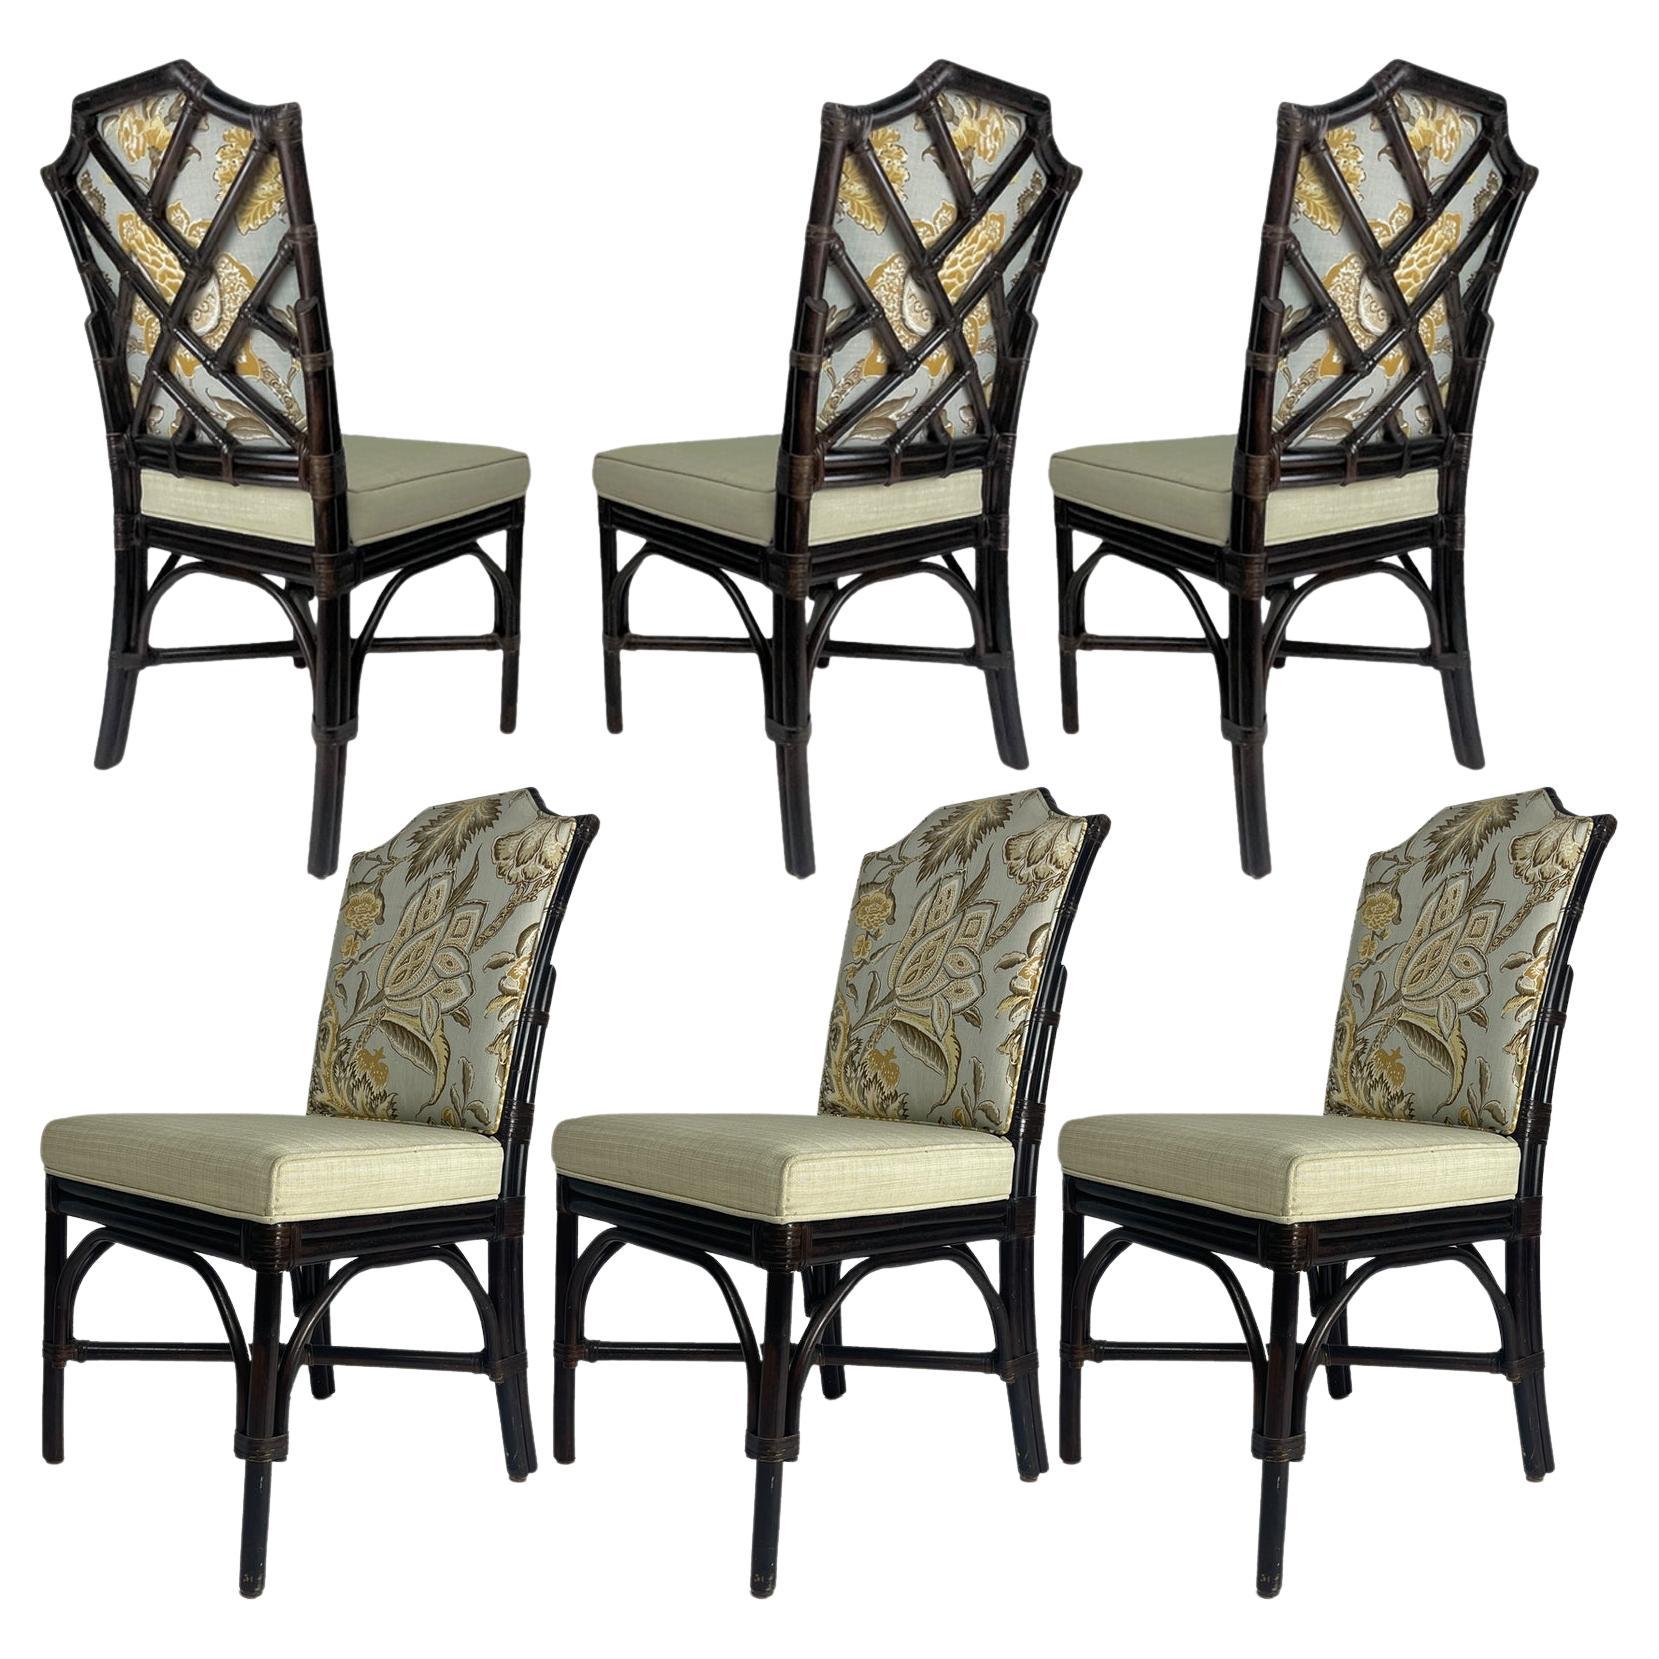 6 Chinoiserie Bamboo Rattan Chinese Chippendale Dining Chairs 12 Available For Sale